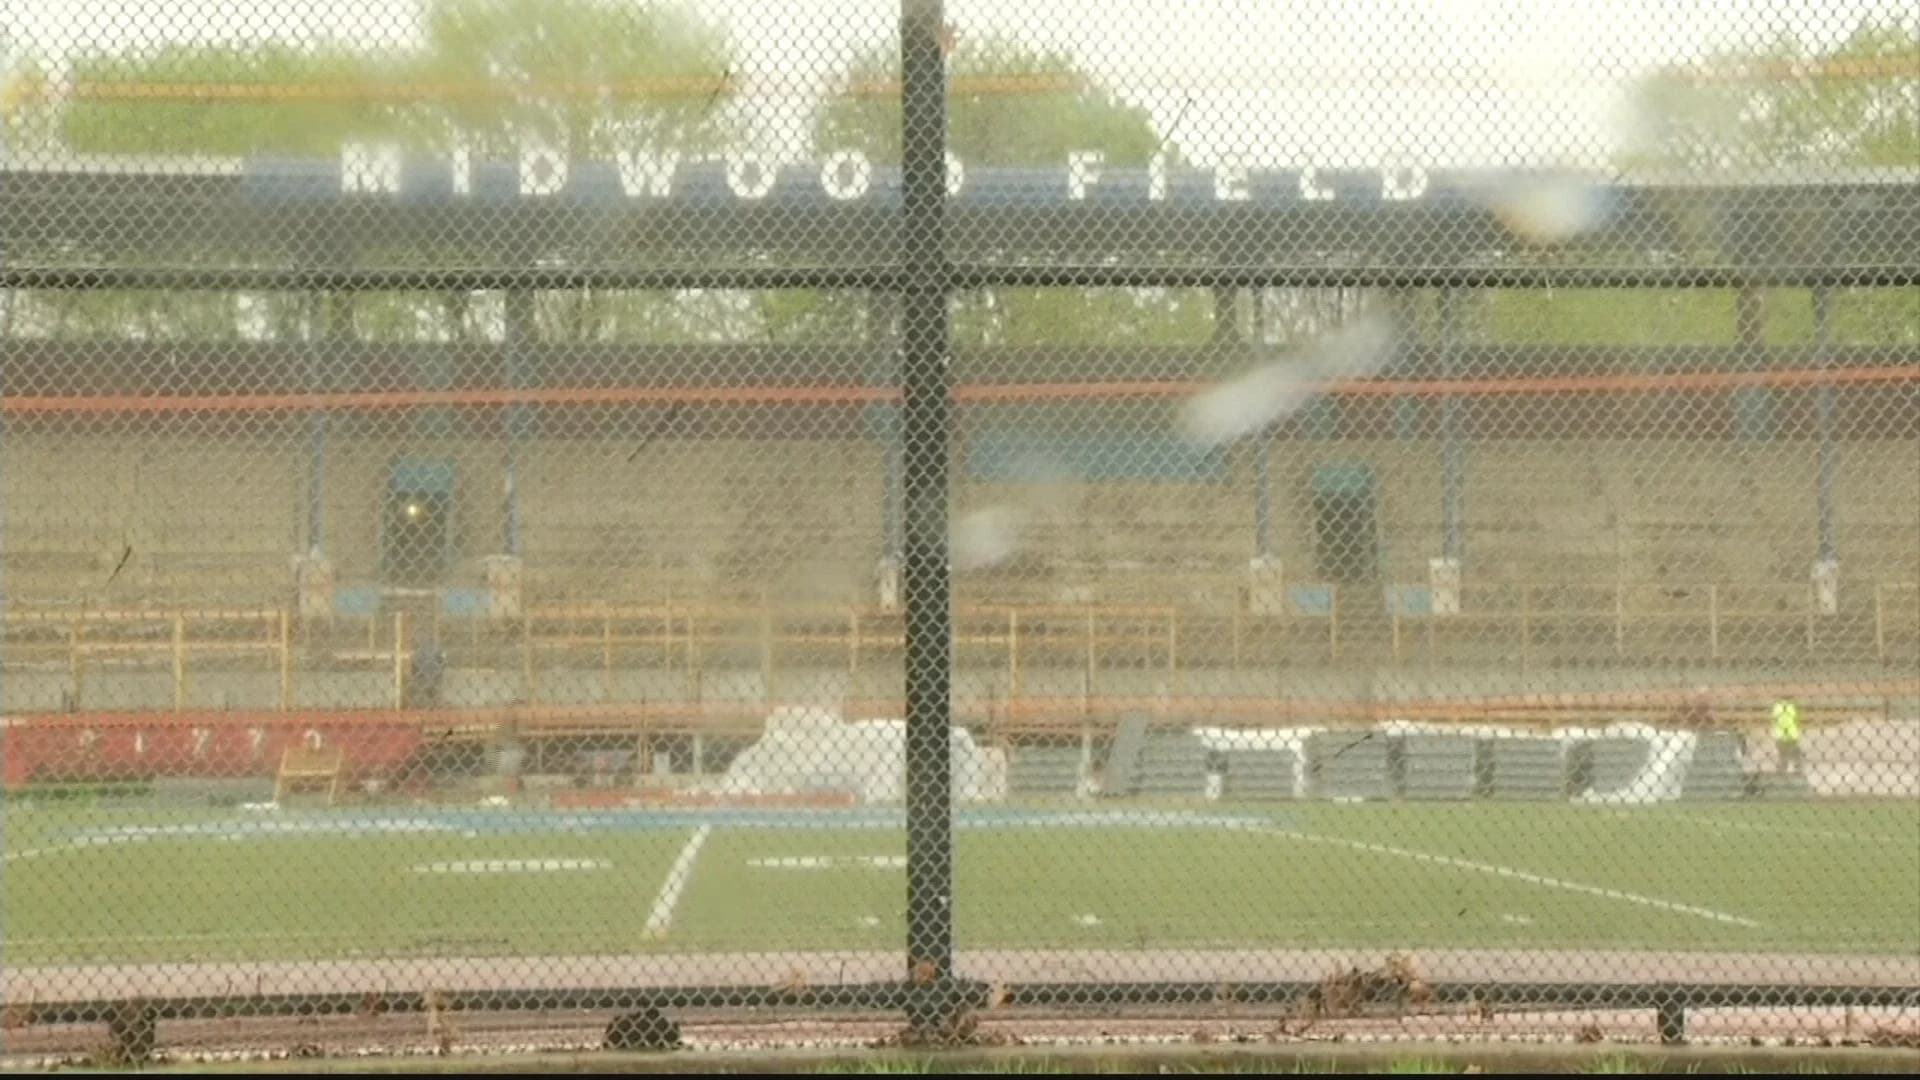 Midwood field could open to the public